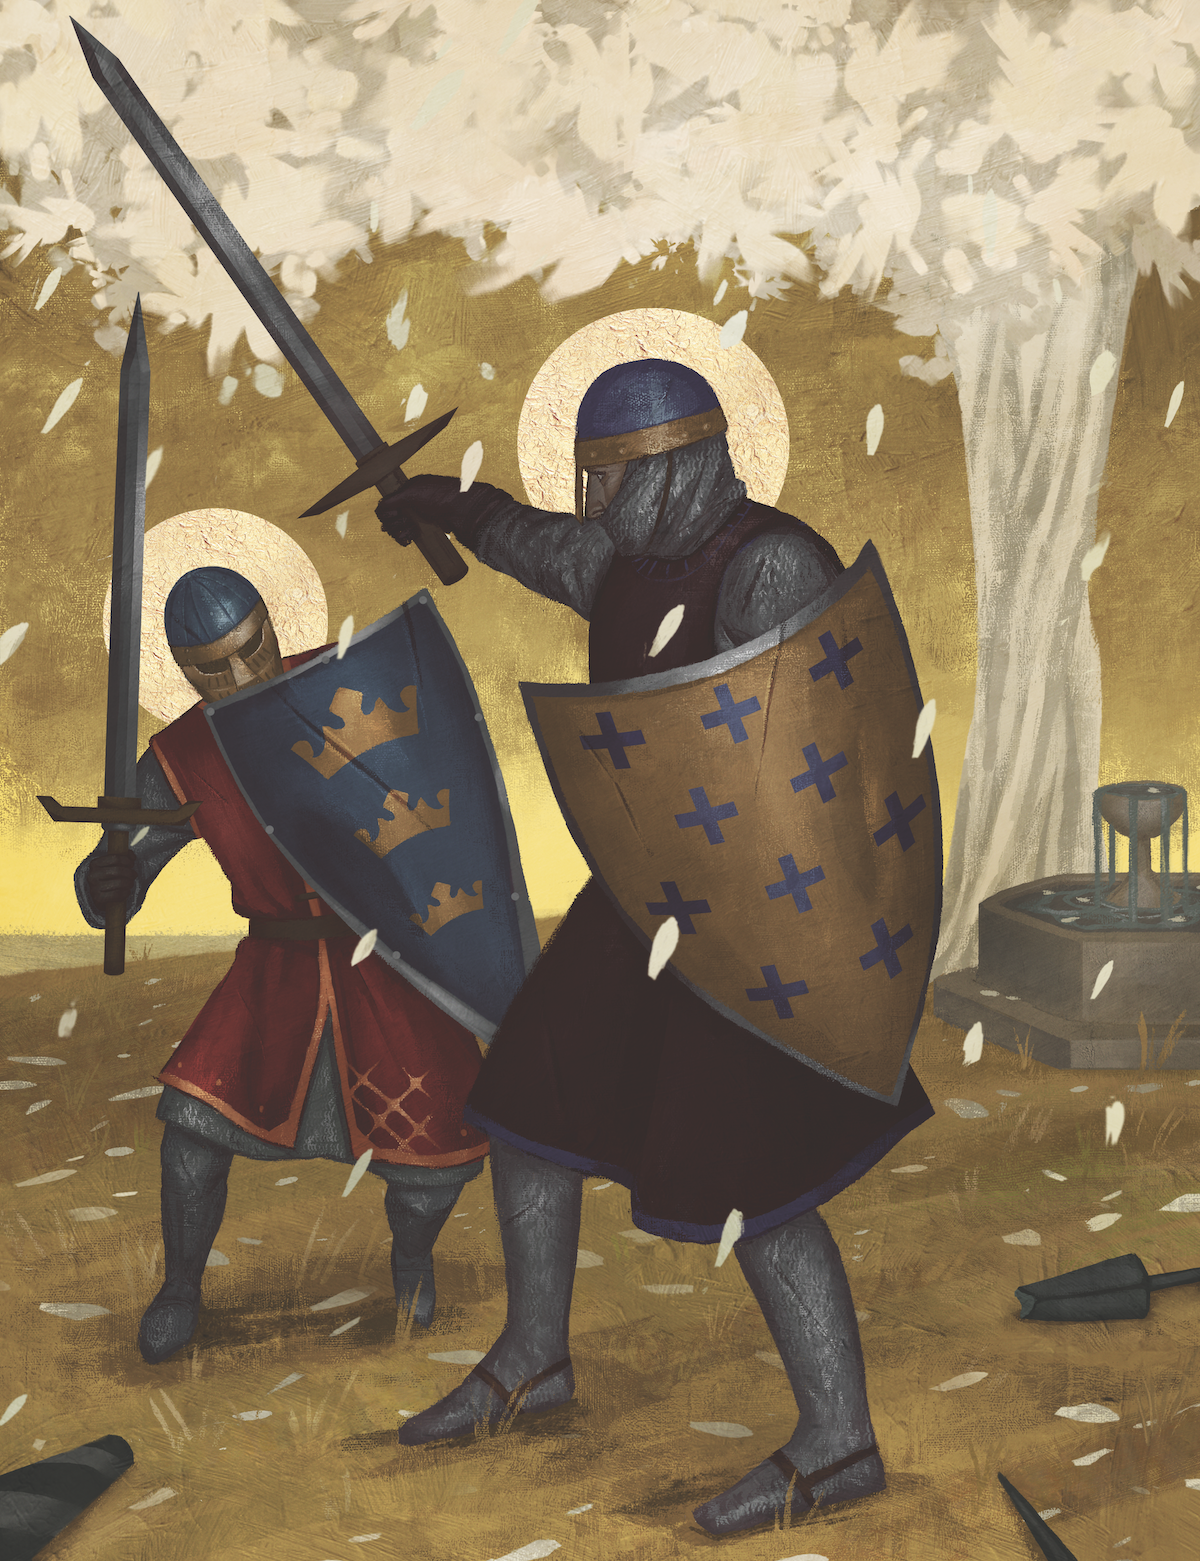 fight-between-kings-by-eleonor-piteira-kap.png